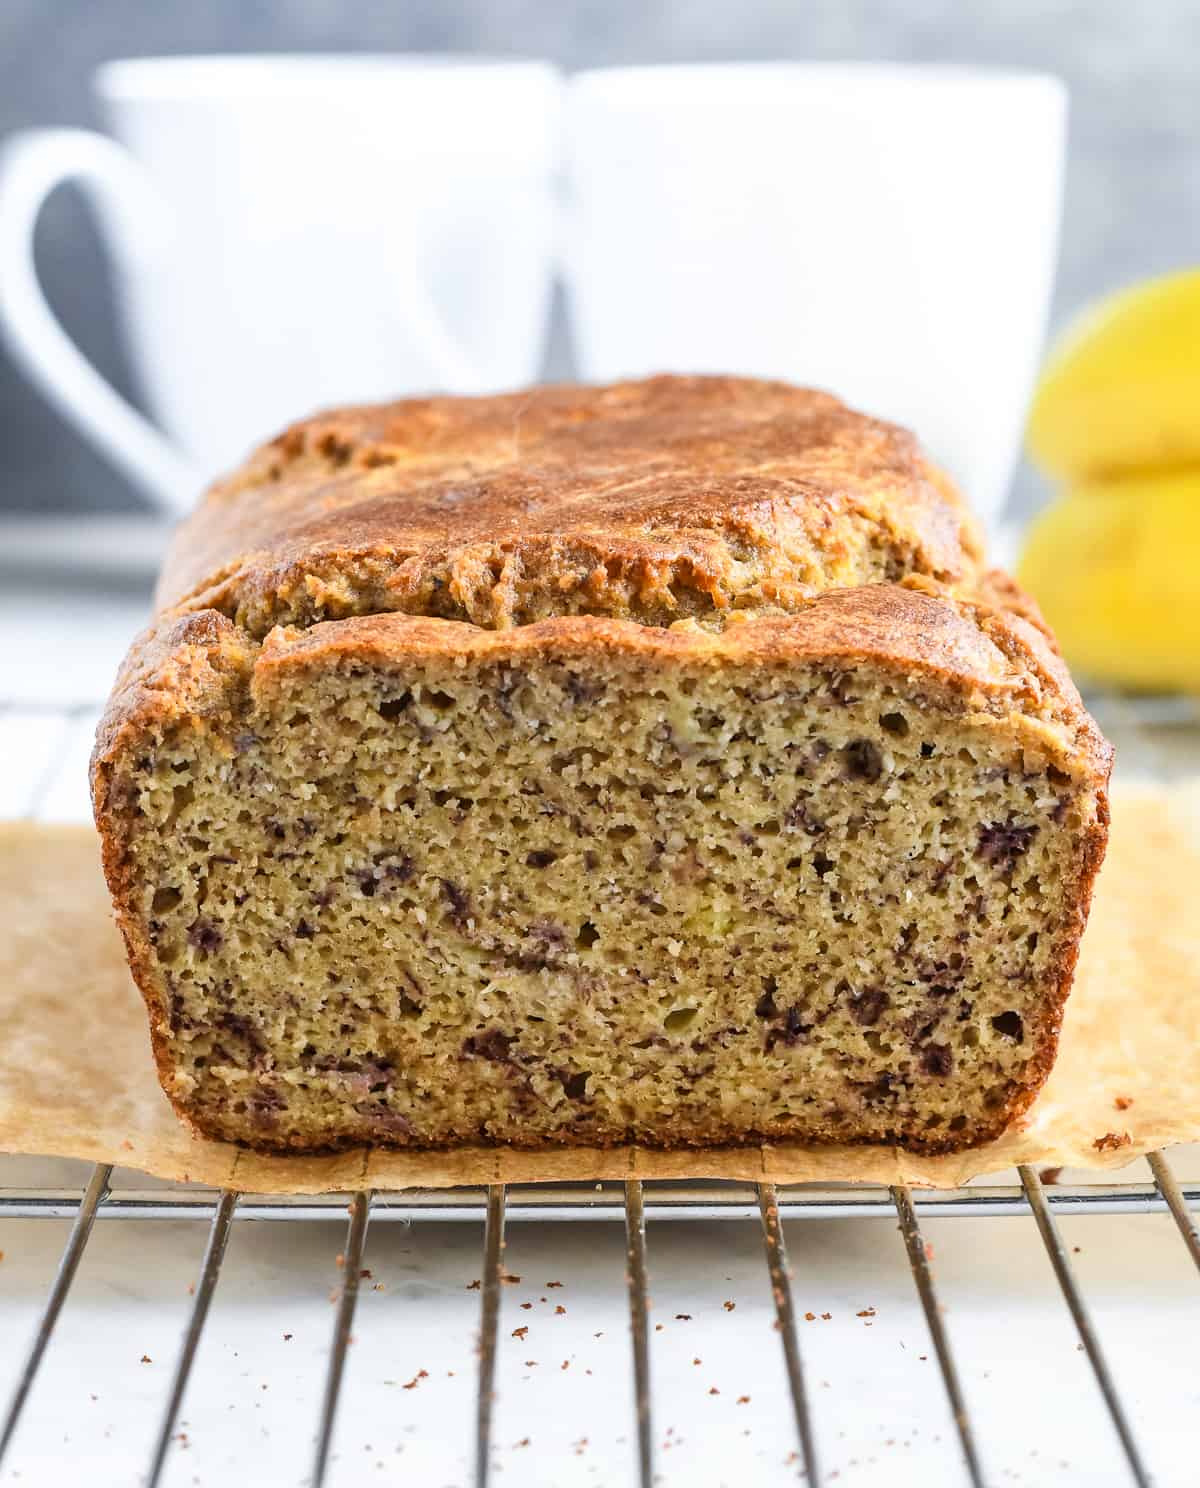 paleo banana bread on wire rack showing the front of the bread